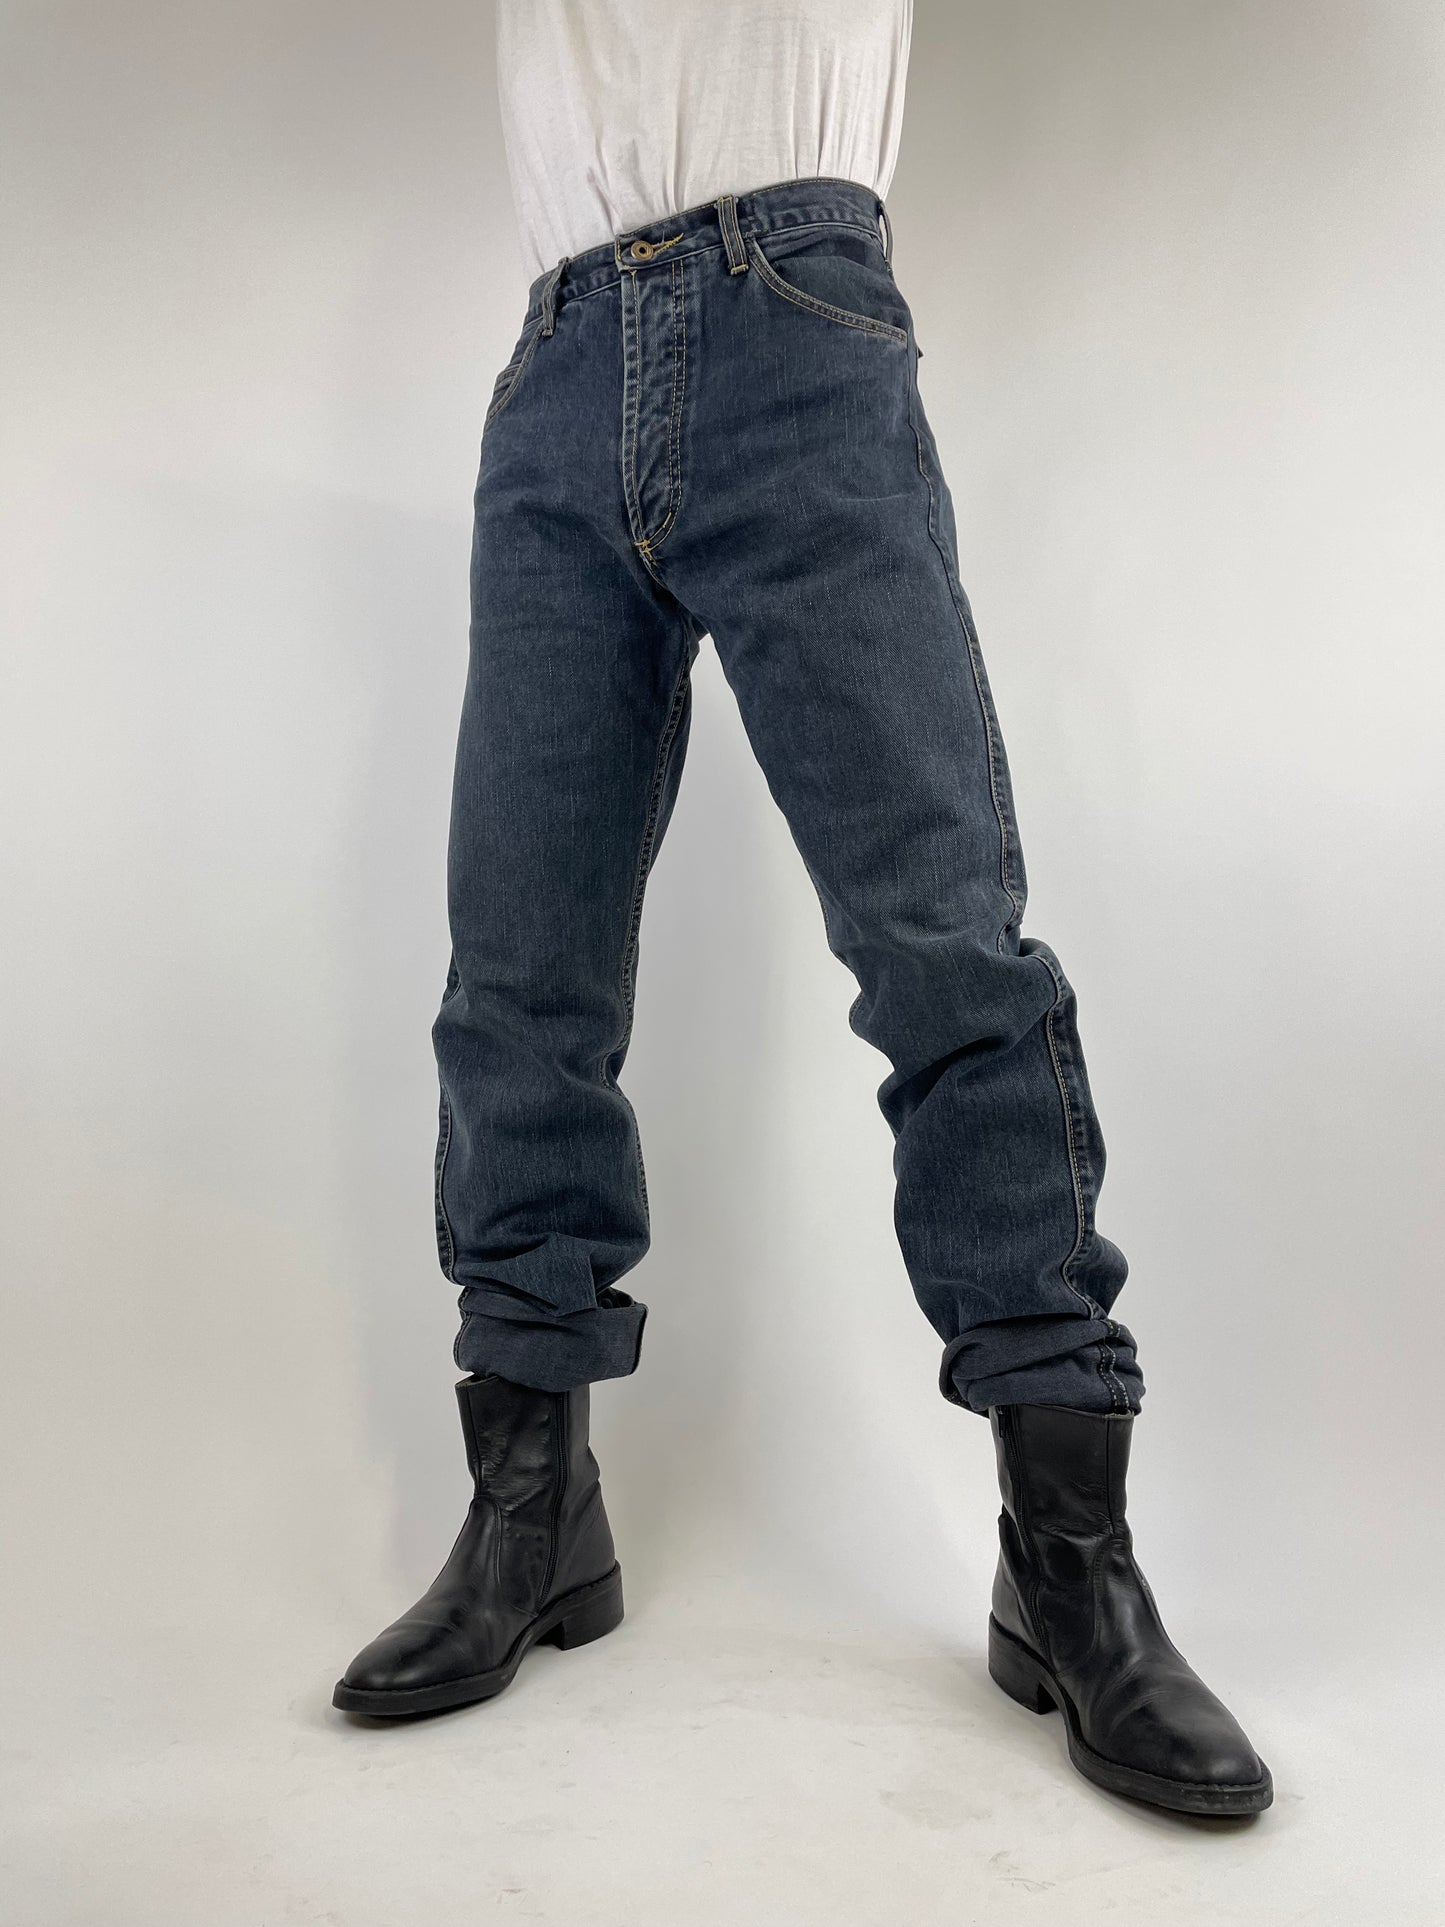 Roy Roger's Jeans